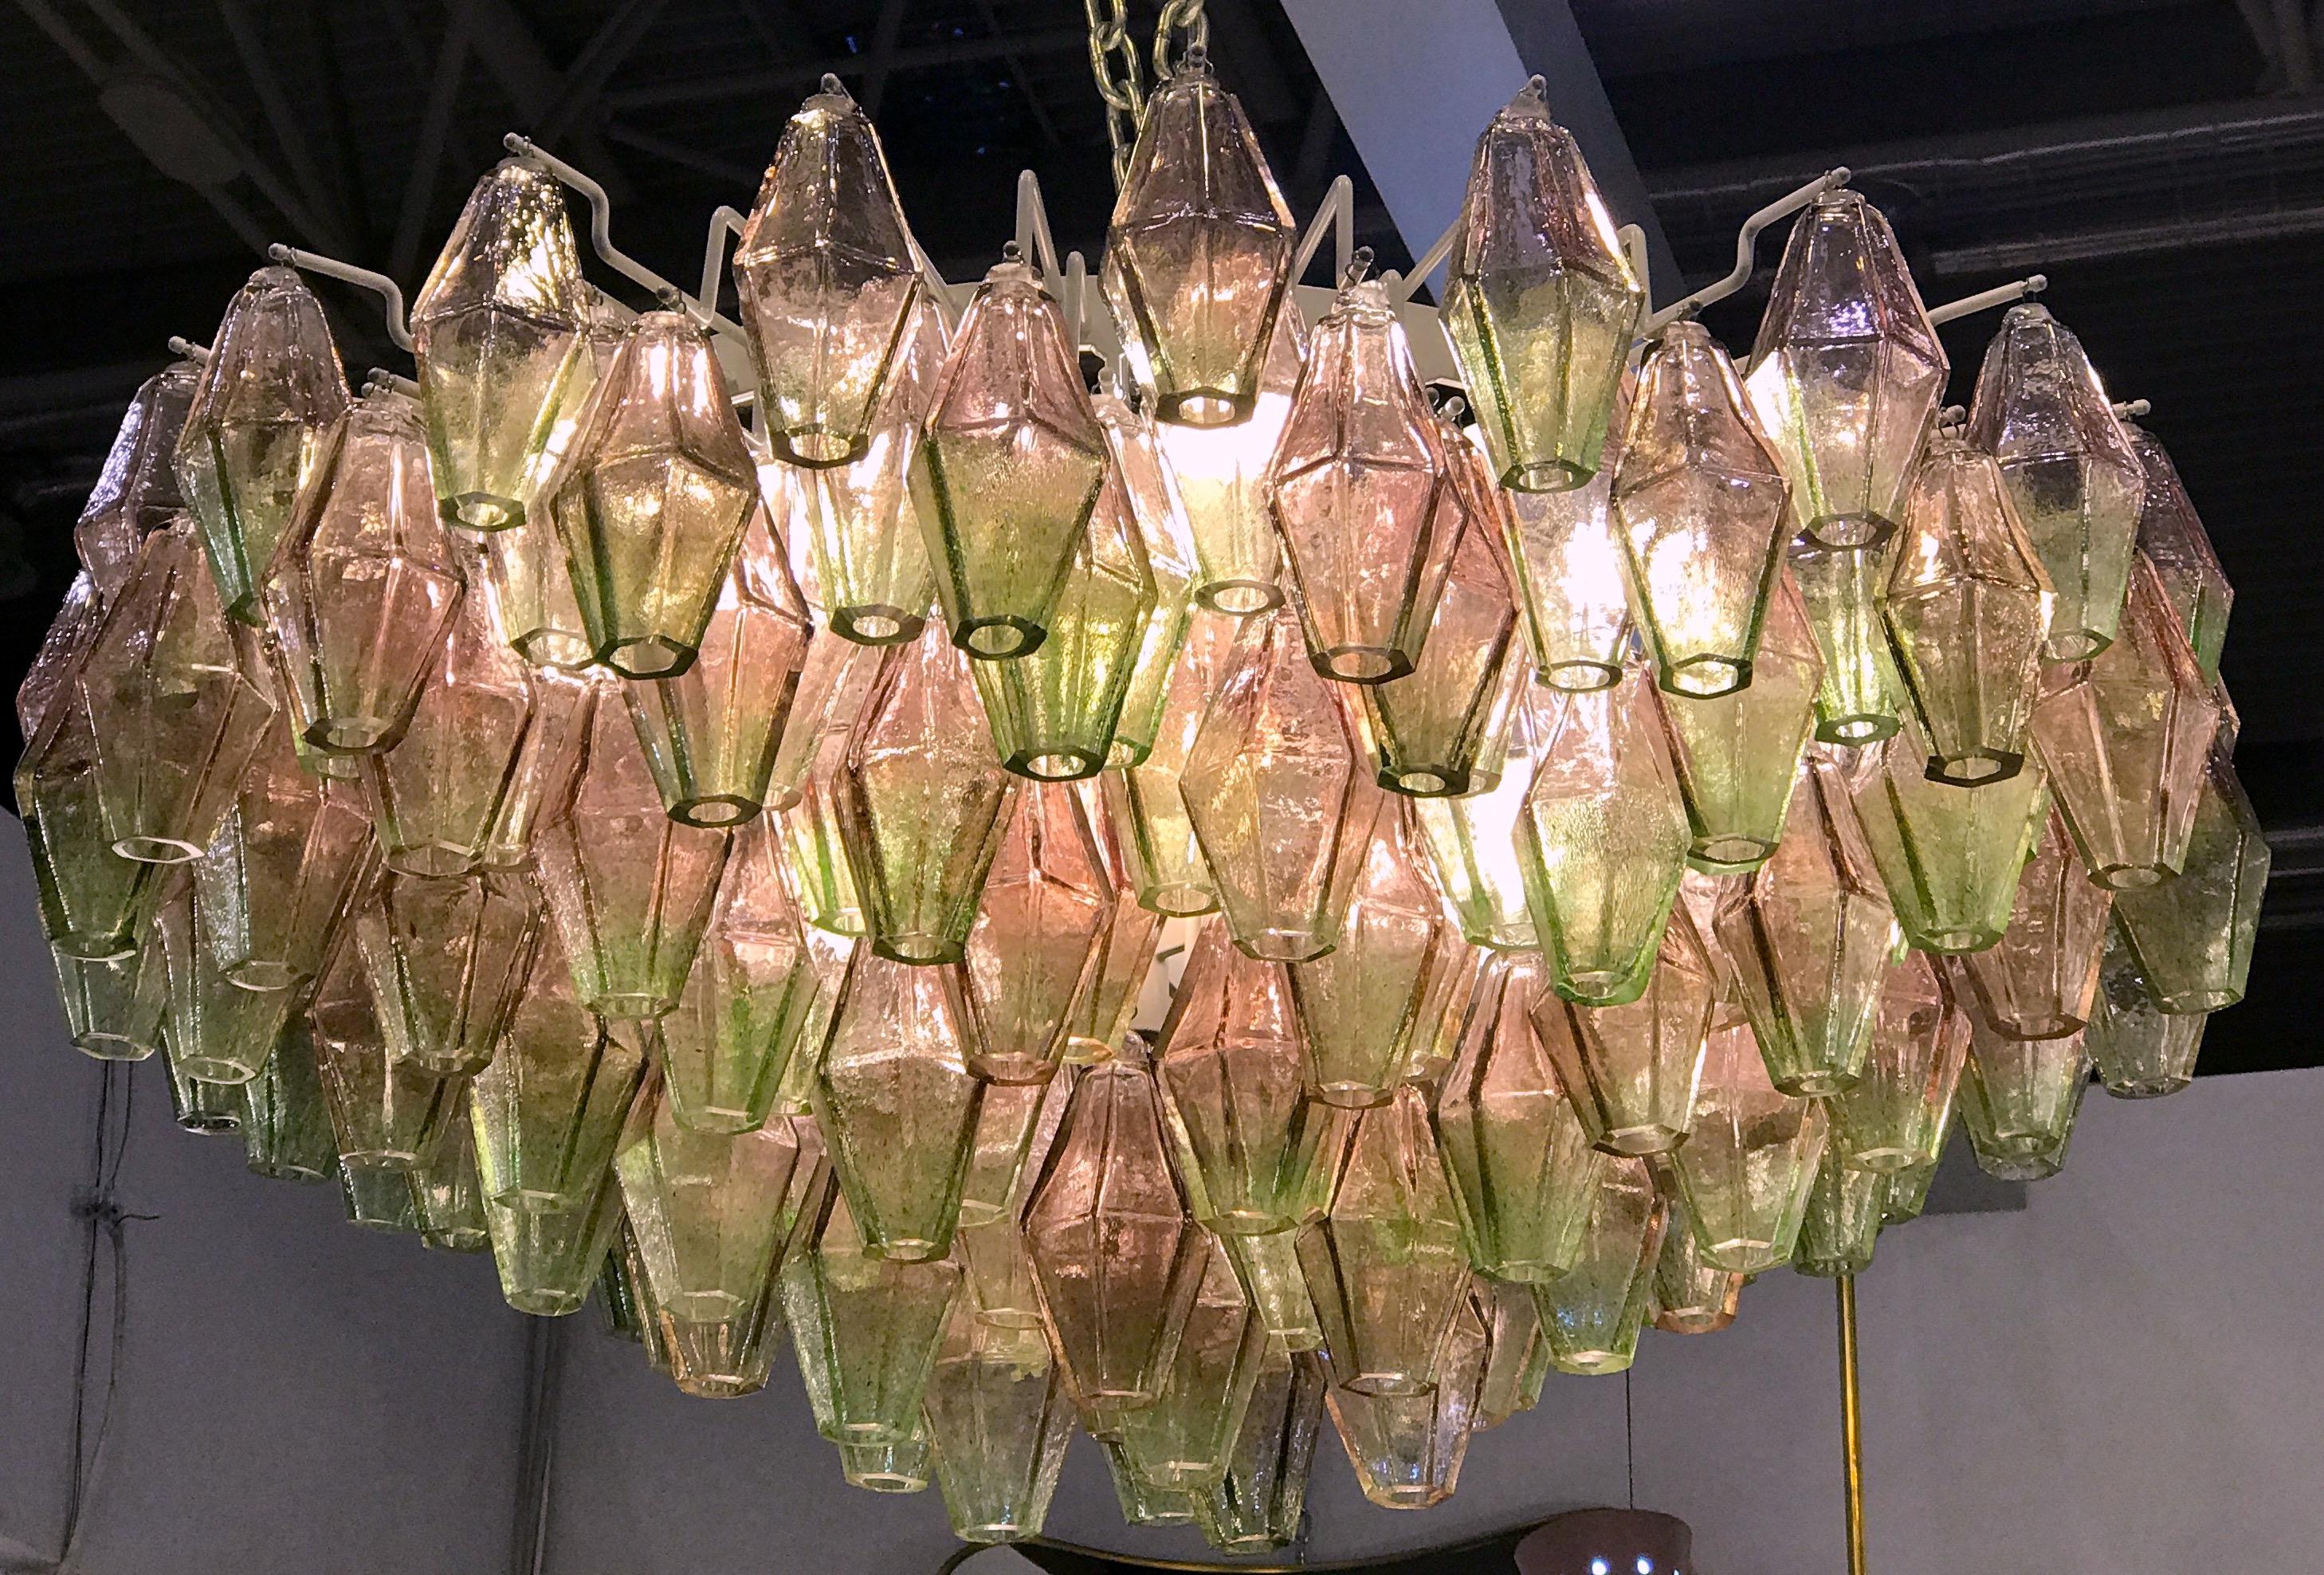 Midcentury original large Venini Poliedri chandelier by Carlo Scarpa. Rare combination of pink and green colored Murano glass.
The price of each chandeliers is Euro 9.500,00
Provenance form a historic Roman Palace of the period.